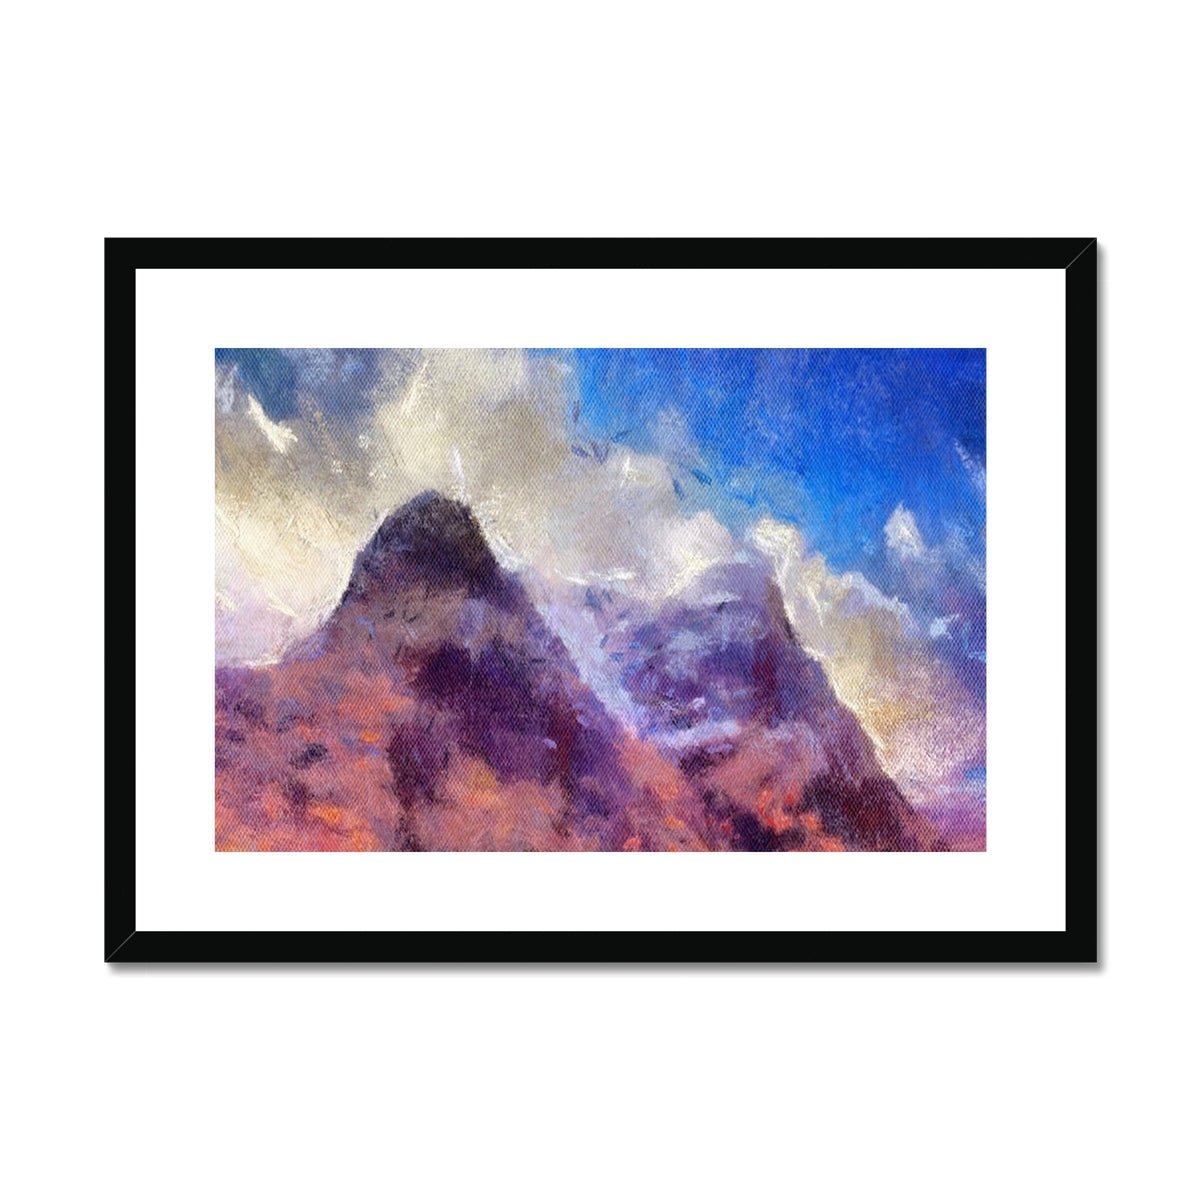 Glencoe Painting | Framed & Mounted Prints From Scotland-Framed & Mounted Prints-Glencoe Art Gallery-A2 Landscape-Black Frame-Paintings, Prints, Homeware, Art Gifts From Scotland By Scottish Artist Kevin Hunter